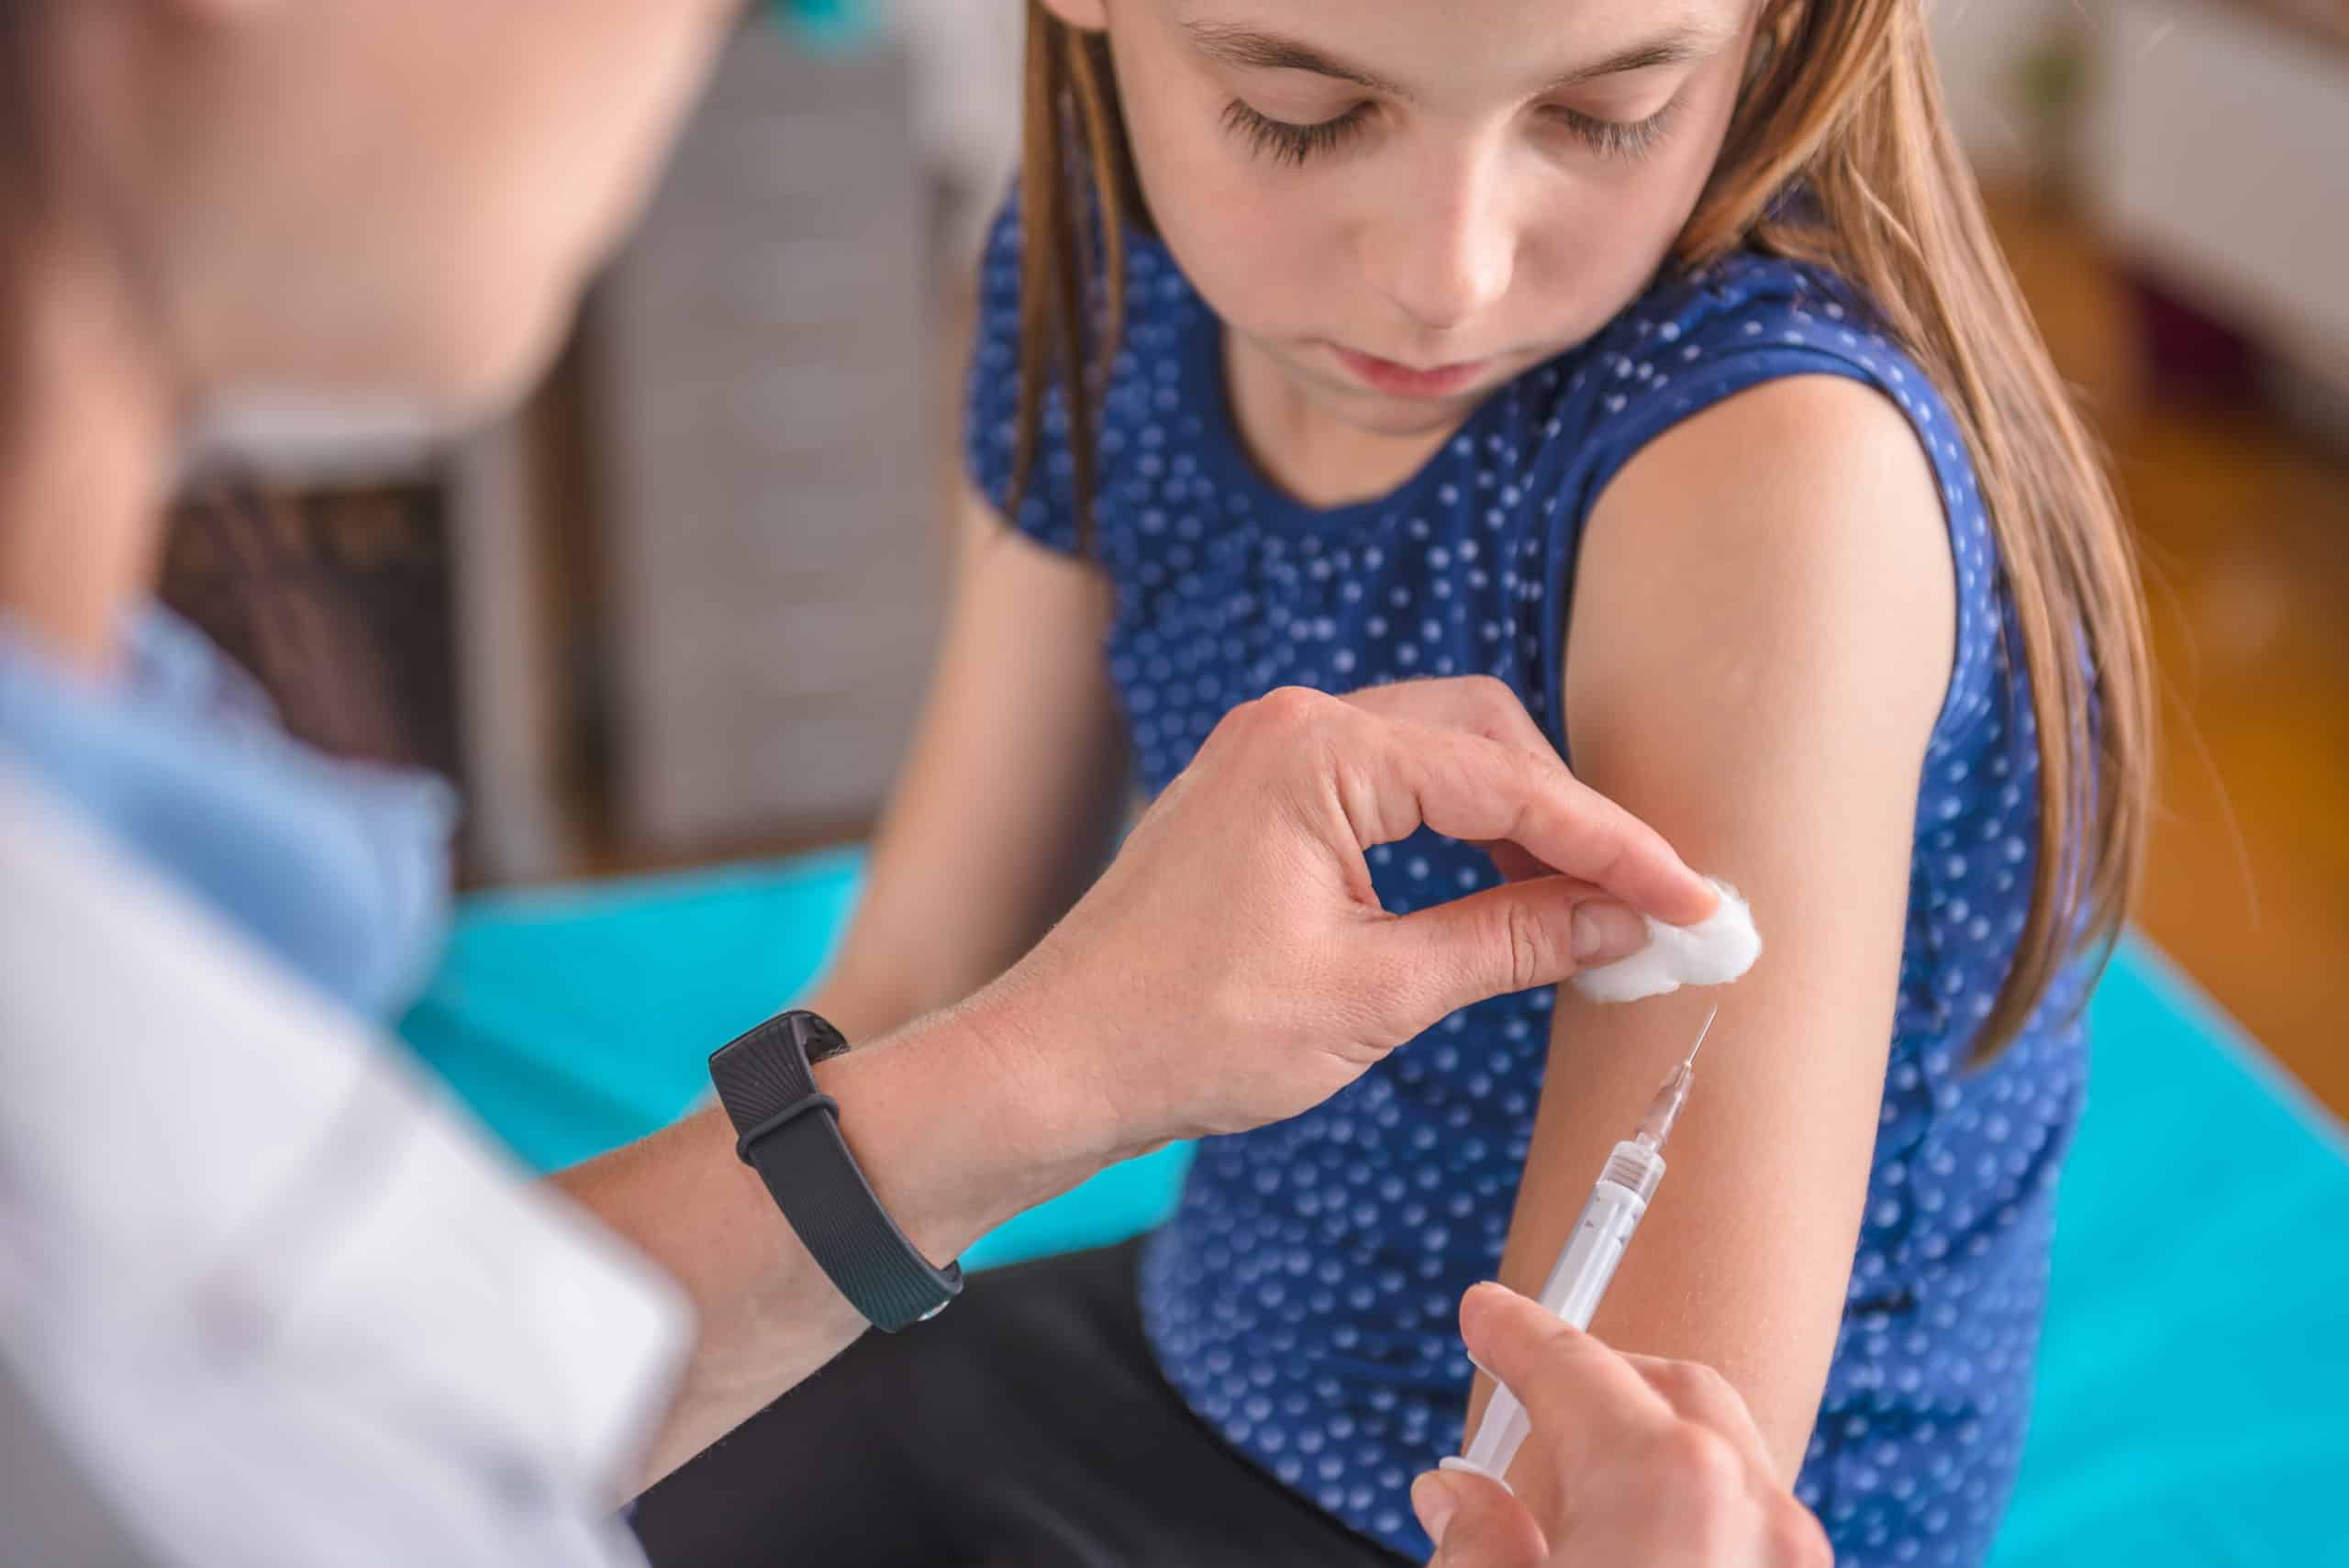 Pediatrics female doctor giving a young girl a vaccine shot in the arm